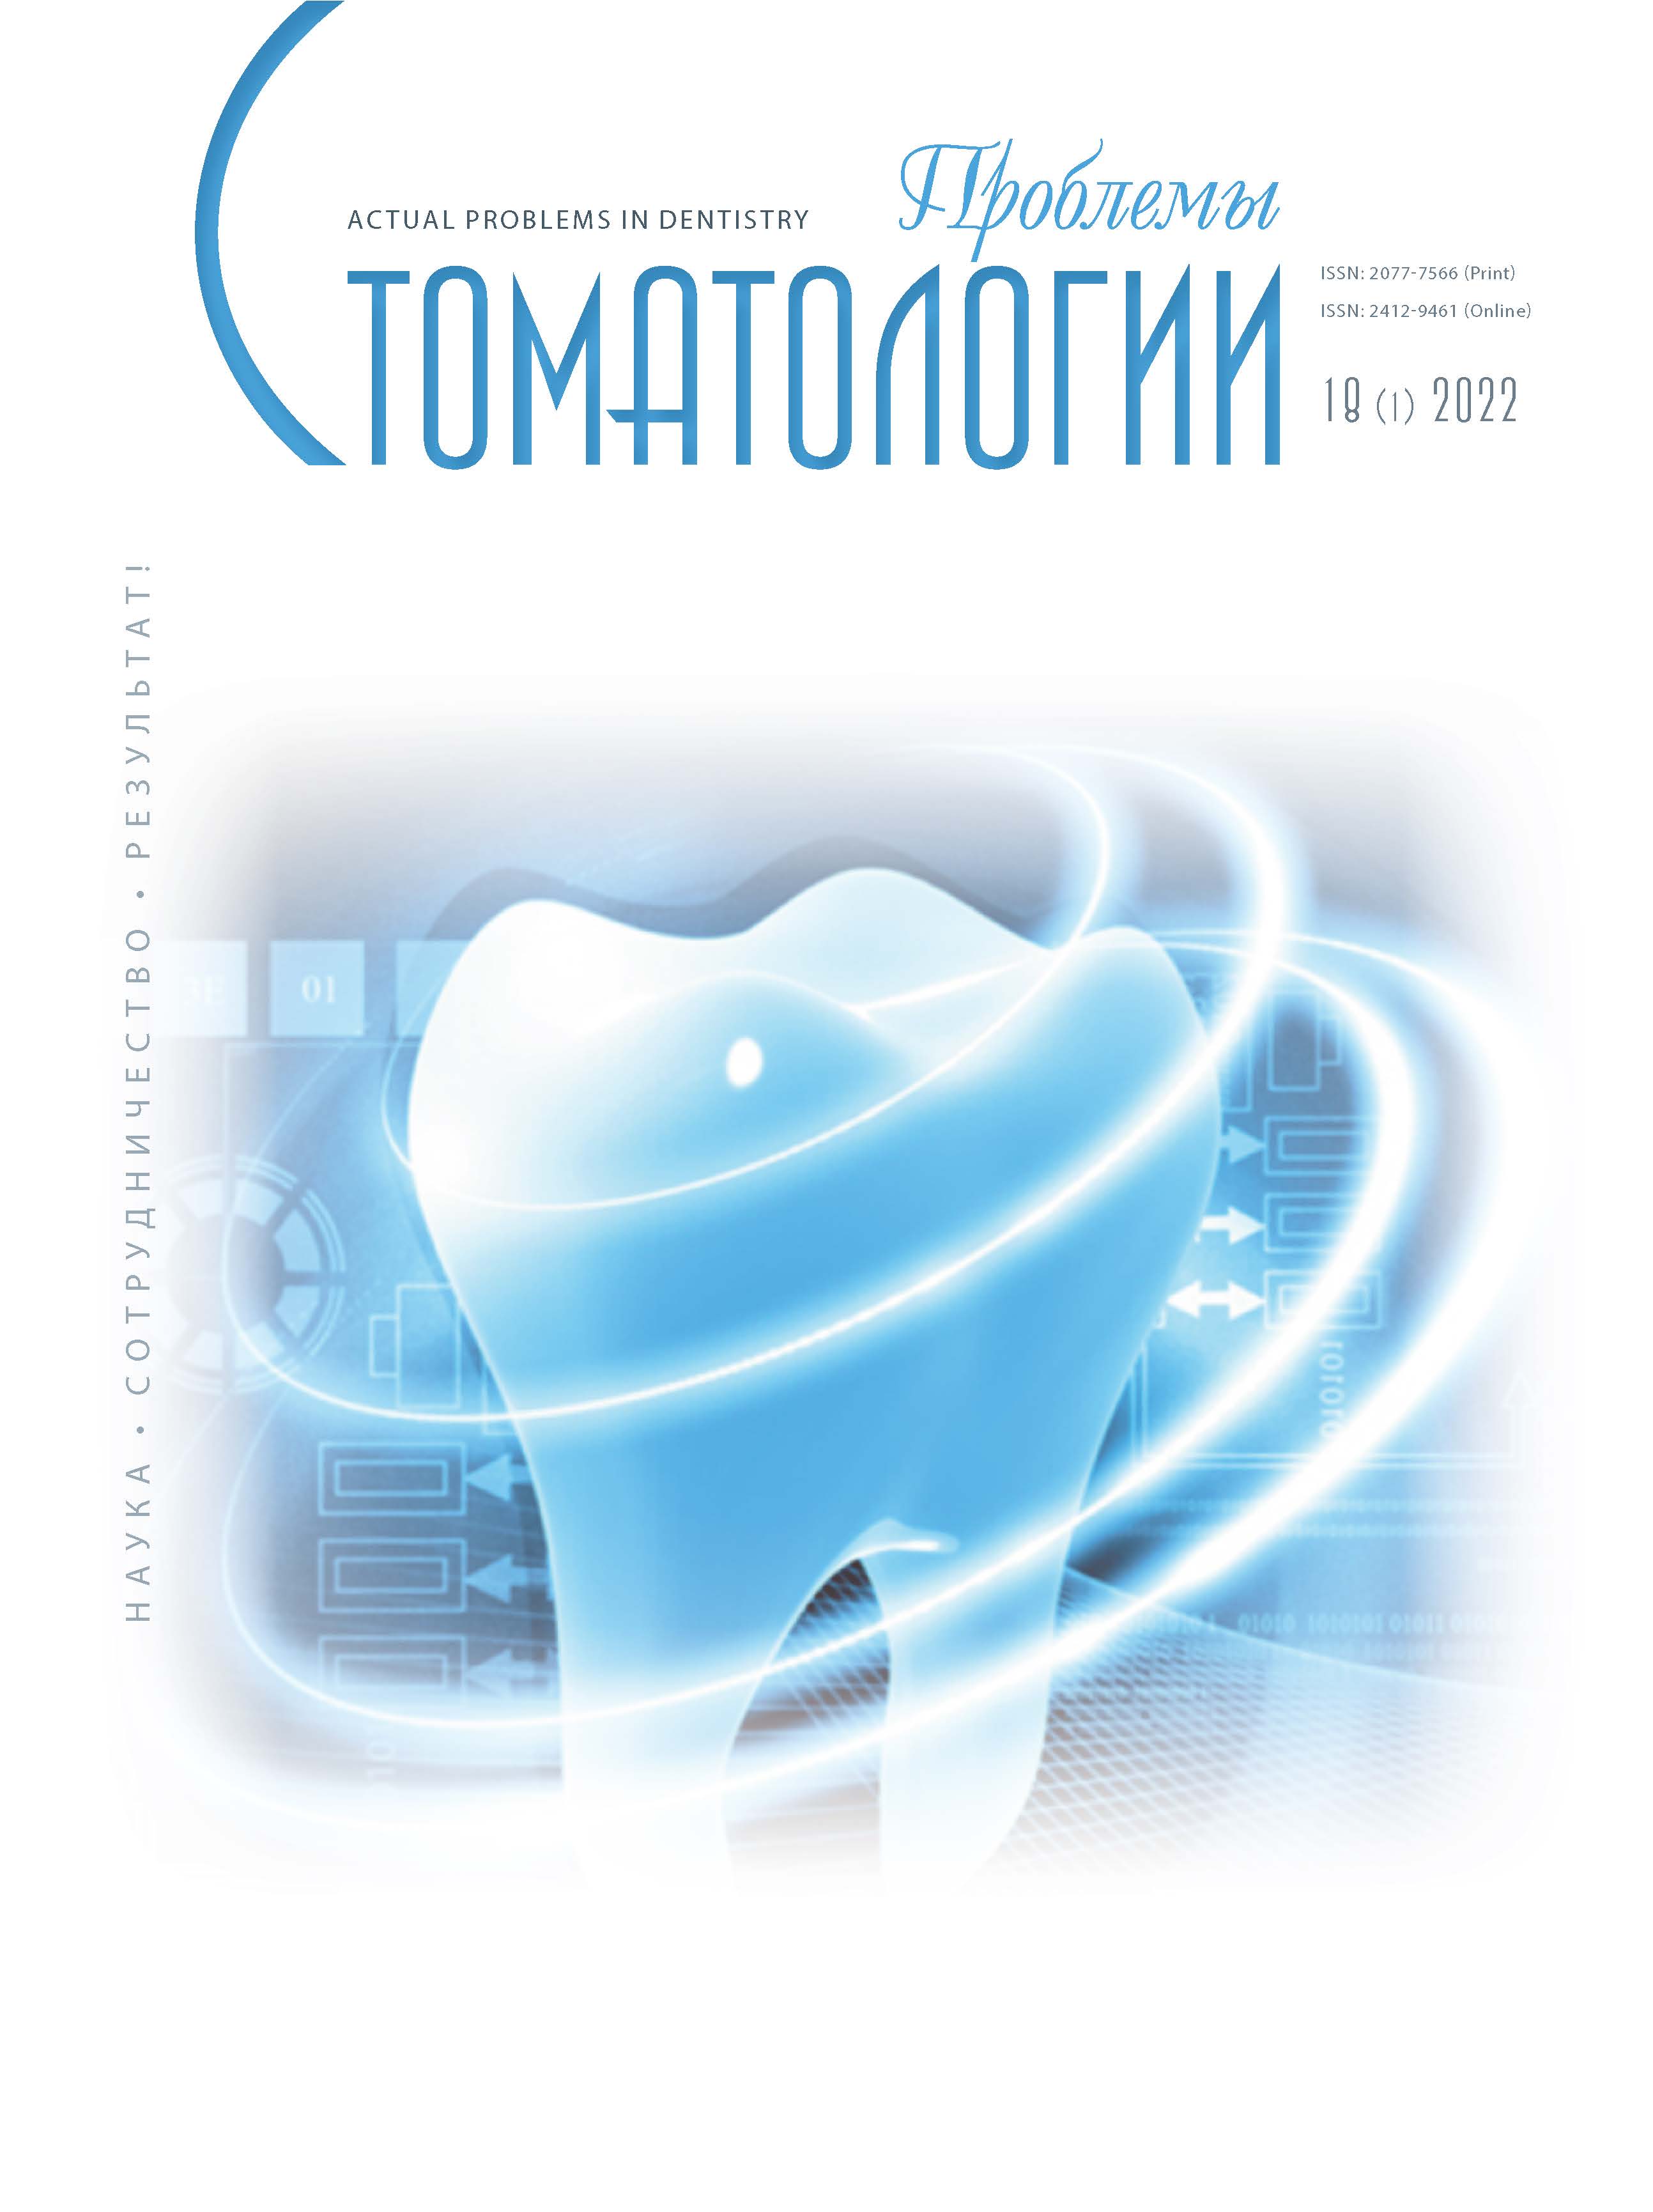                         THE IMPACT OF DENTAL TREATMENT ON THE PSYCHOPHYSIOLOGICAL STATUS AND QUALITY OF LIFE OF PATIENTS
            